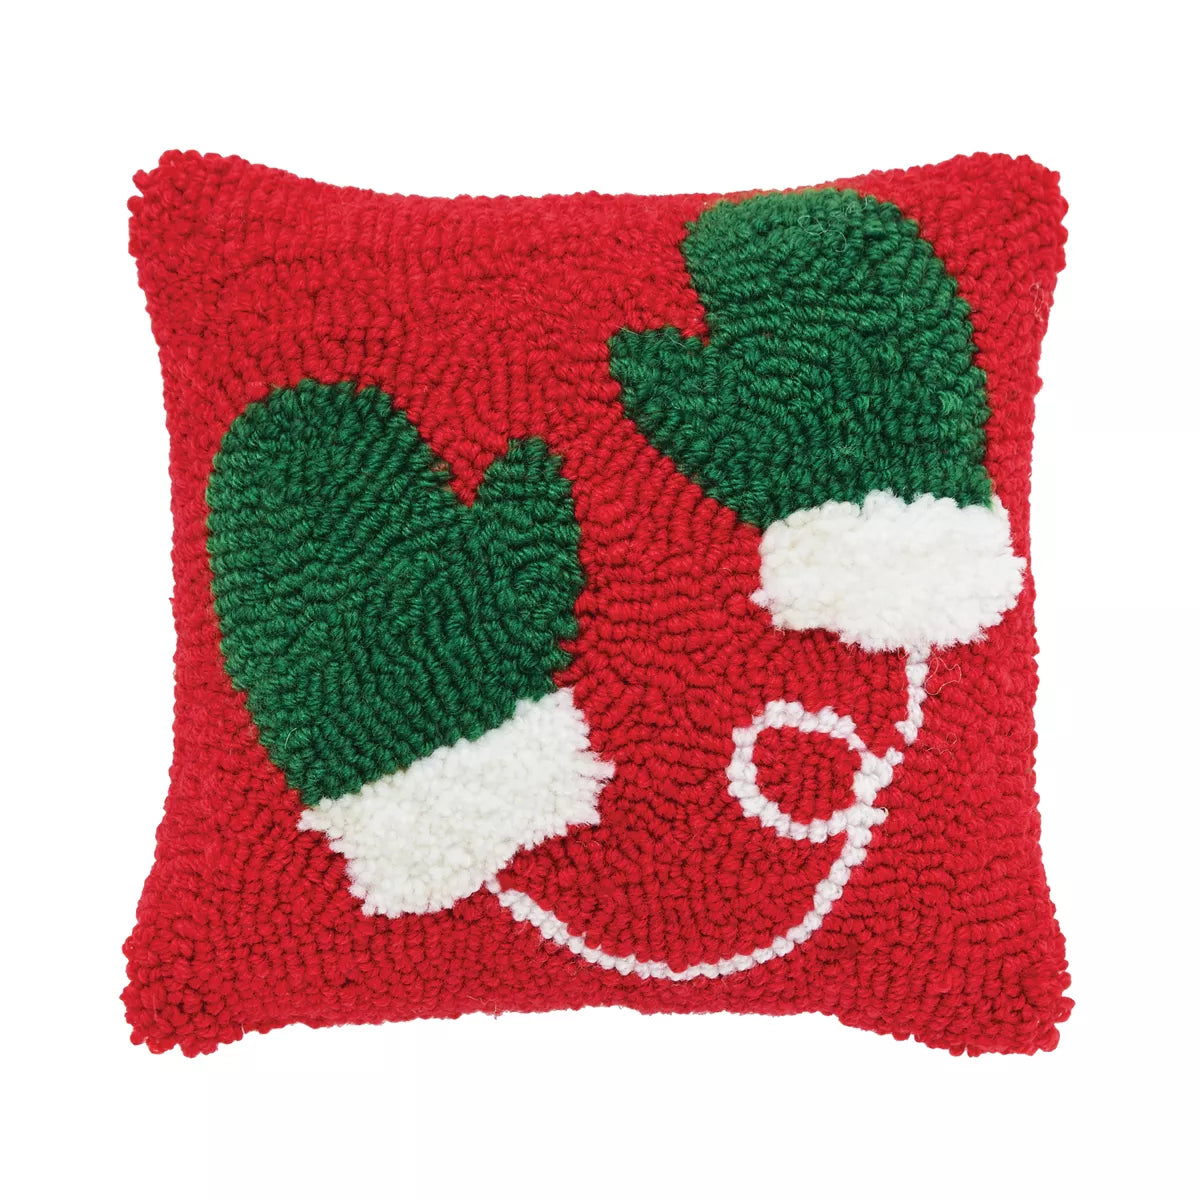 Mittens Hooked Throw Pillow